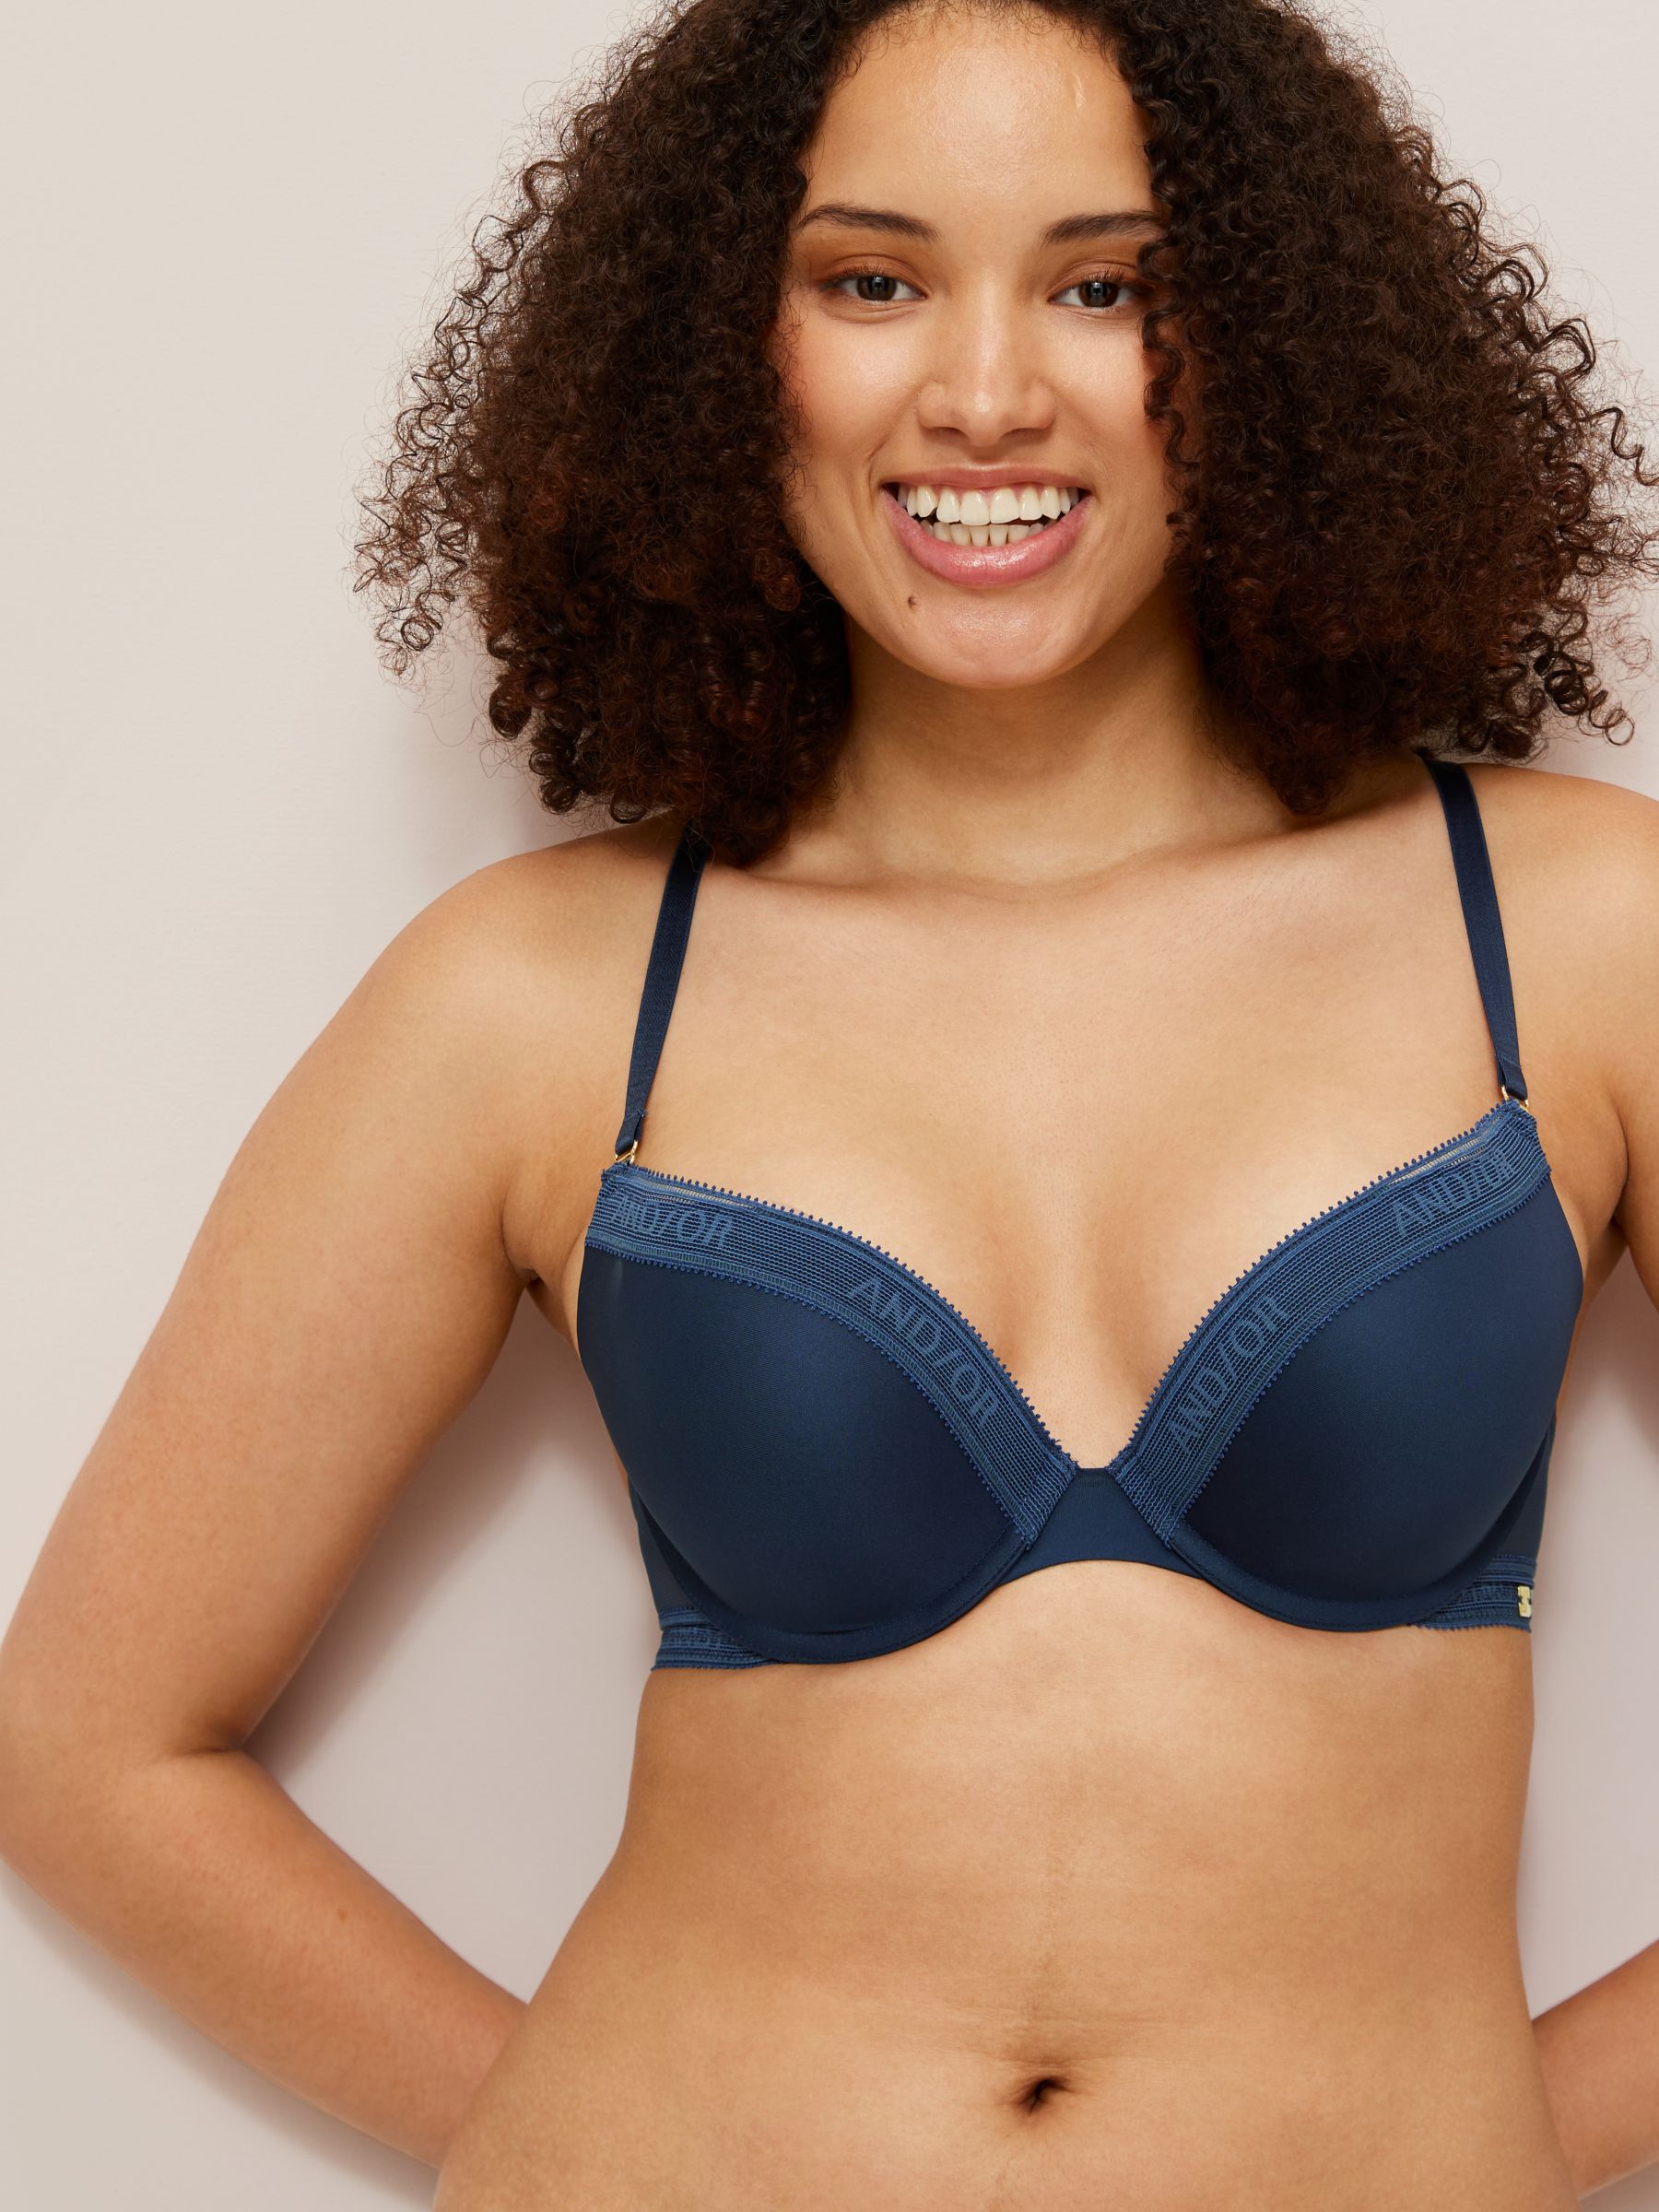 Spandex Push Up Lace Bra and Panty Set For Women - Navy Blue - BR-21